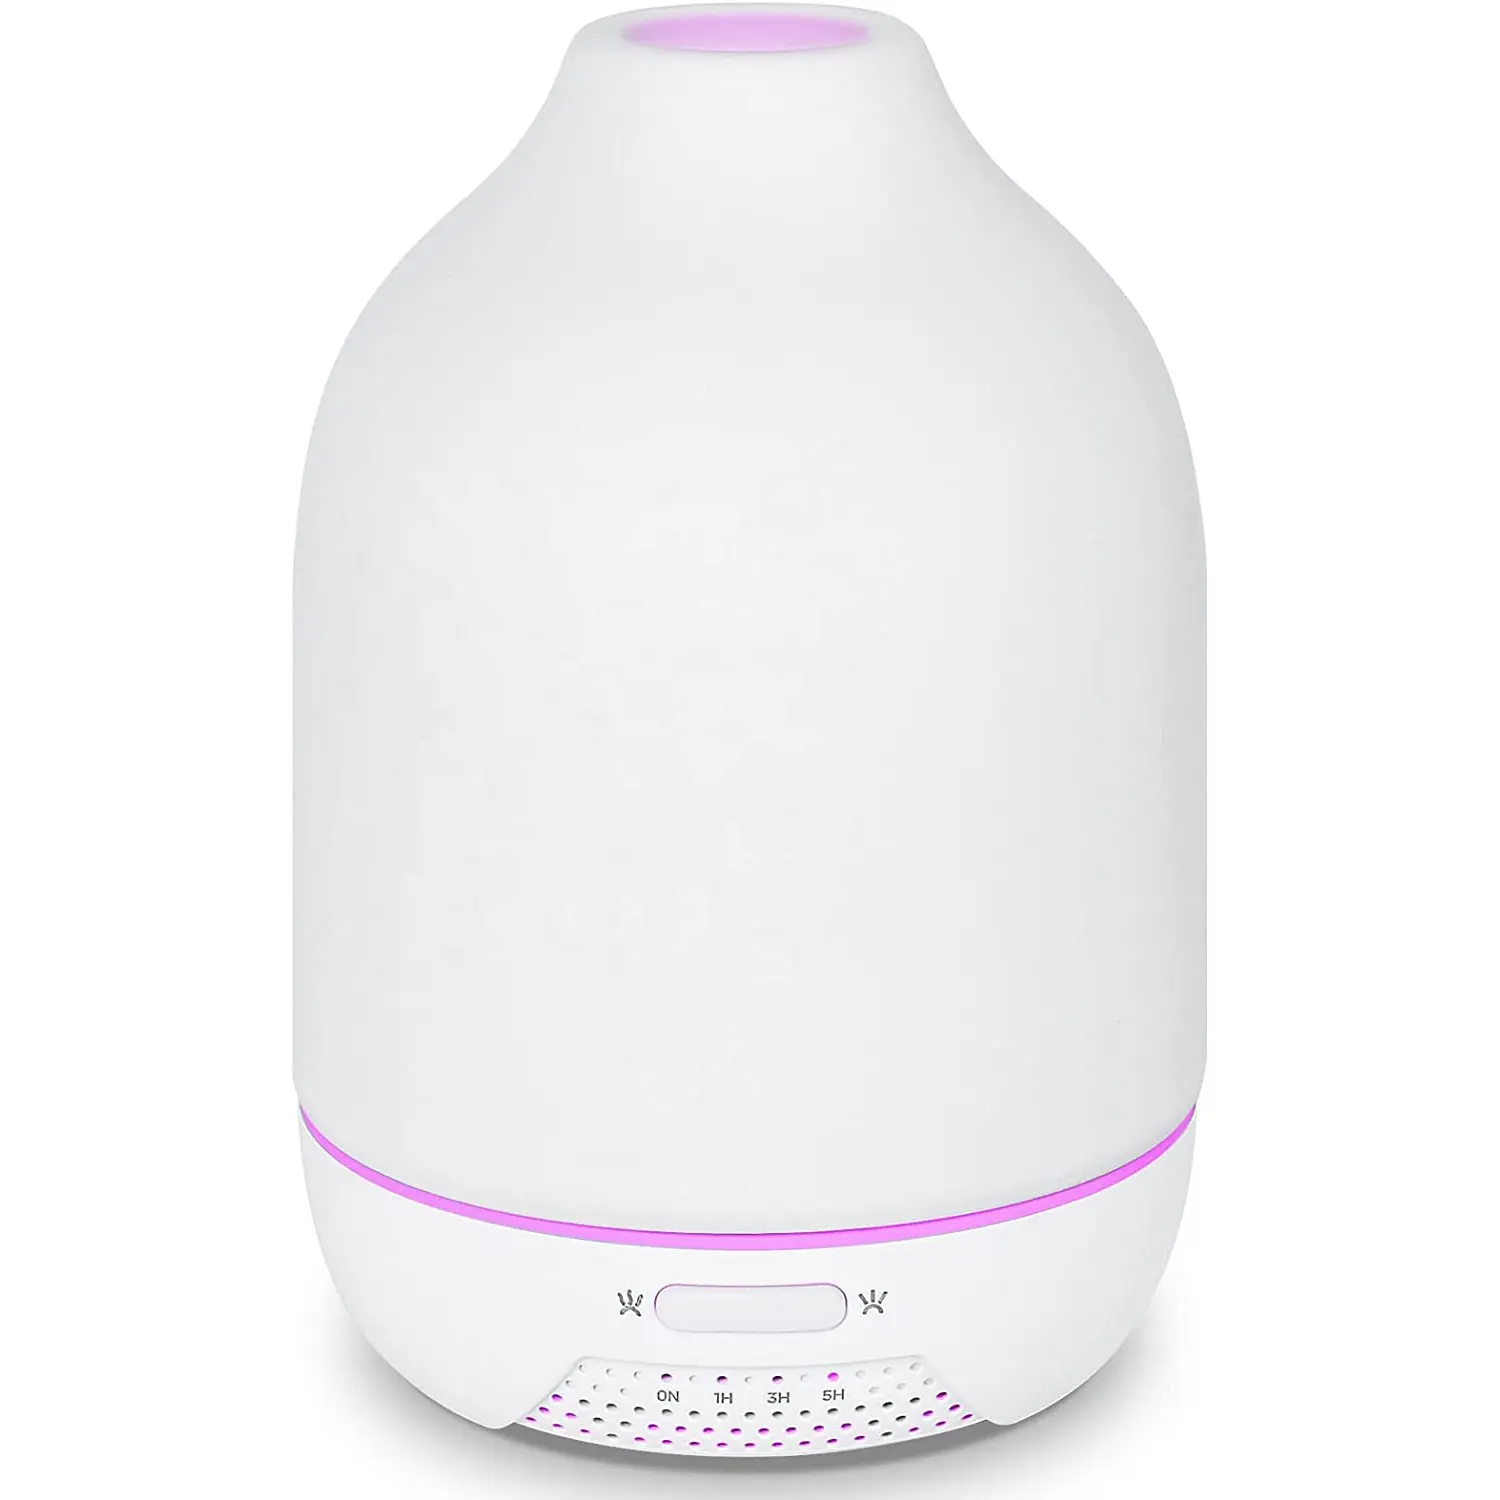 Essential Oil Diffuser Aromatherapy Humidifier 150ML Rubber Ceramic Diffuser Aromatherapy Vaporizer with 7 Soothing Lights